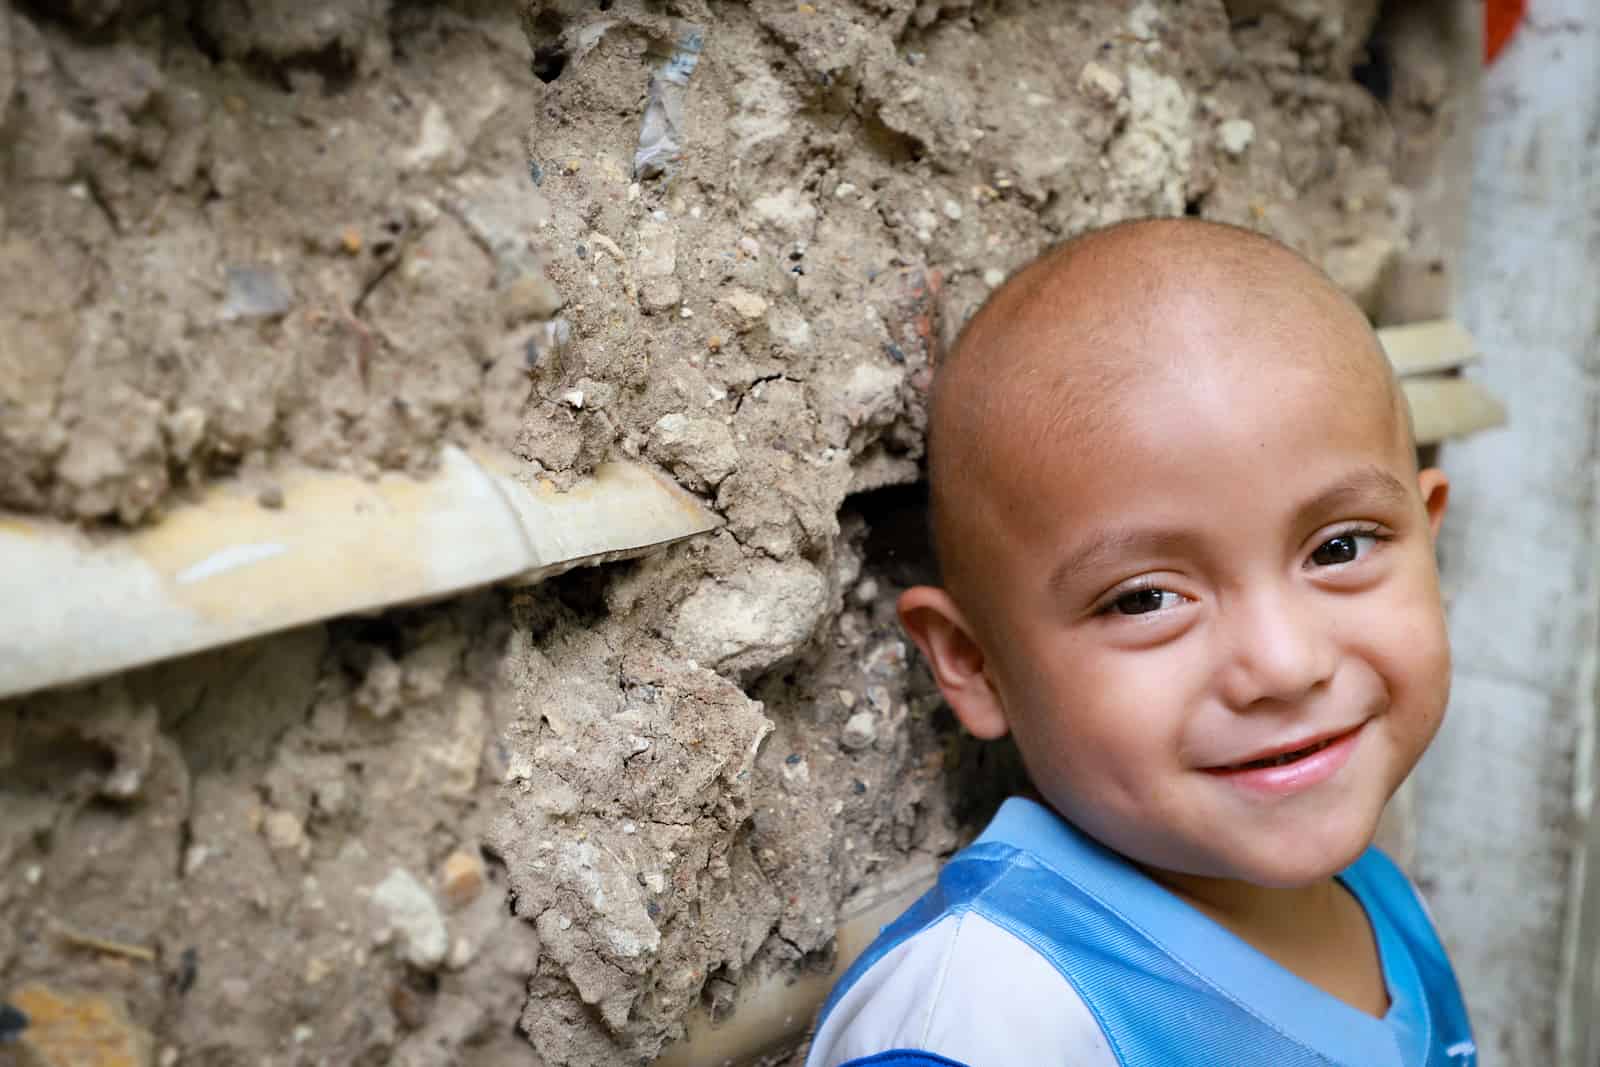 A young boy with no hair leans against a mud wall, smiling.